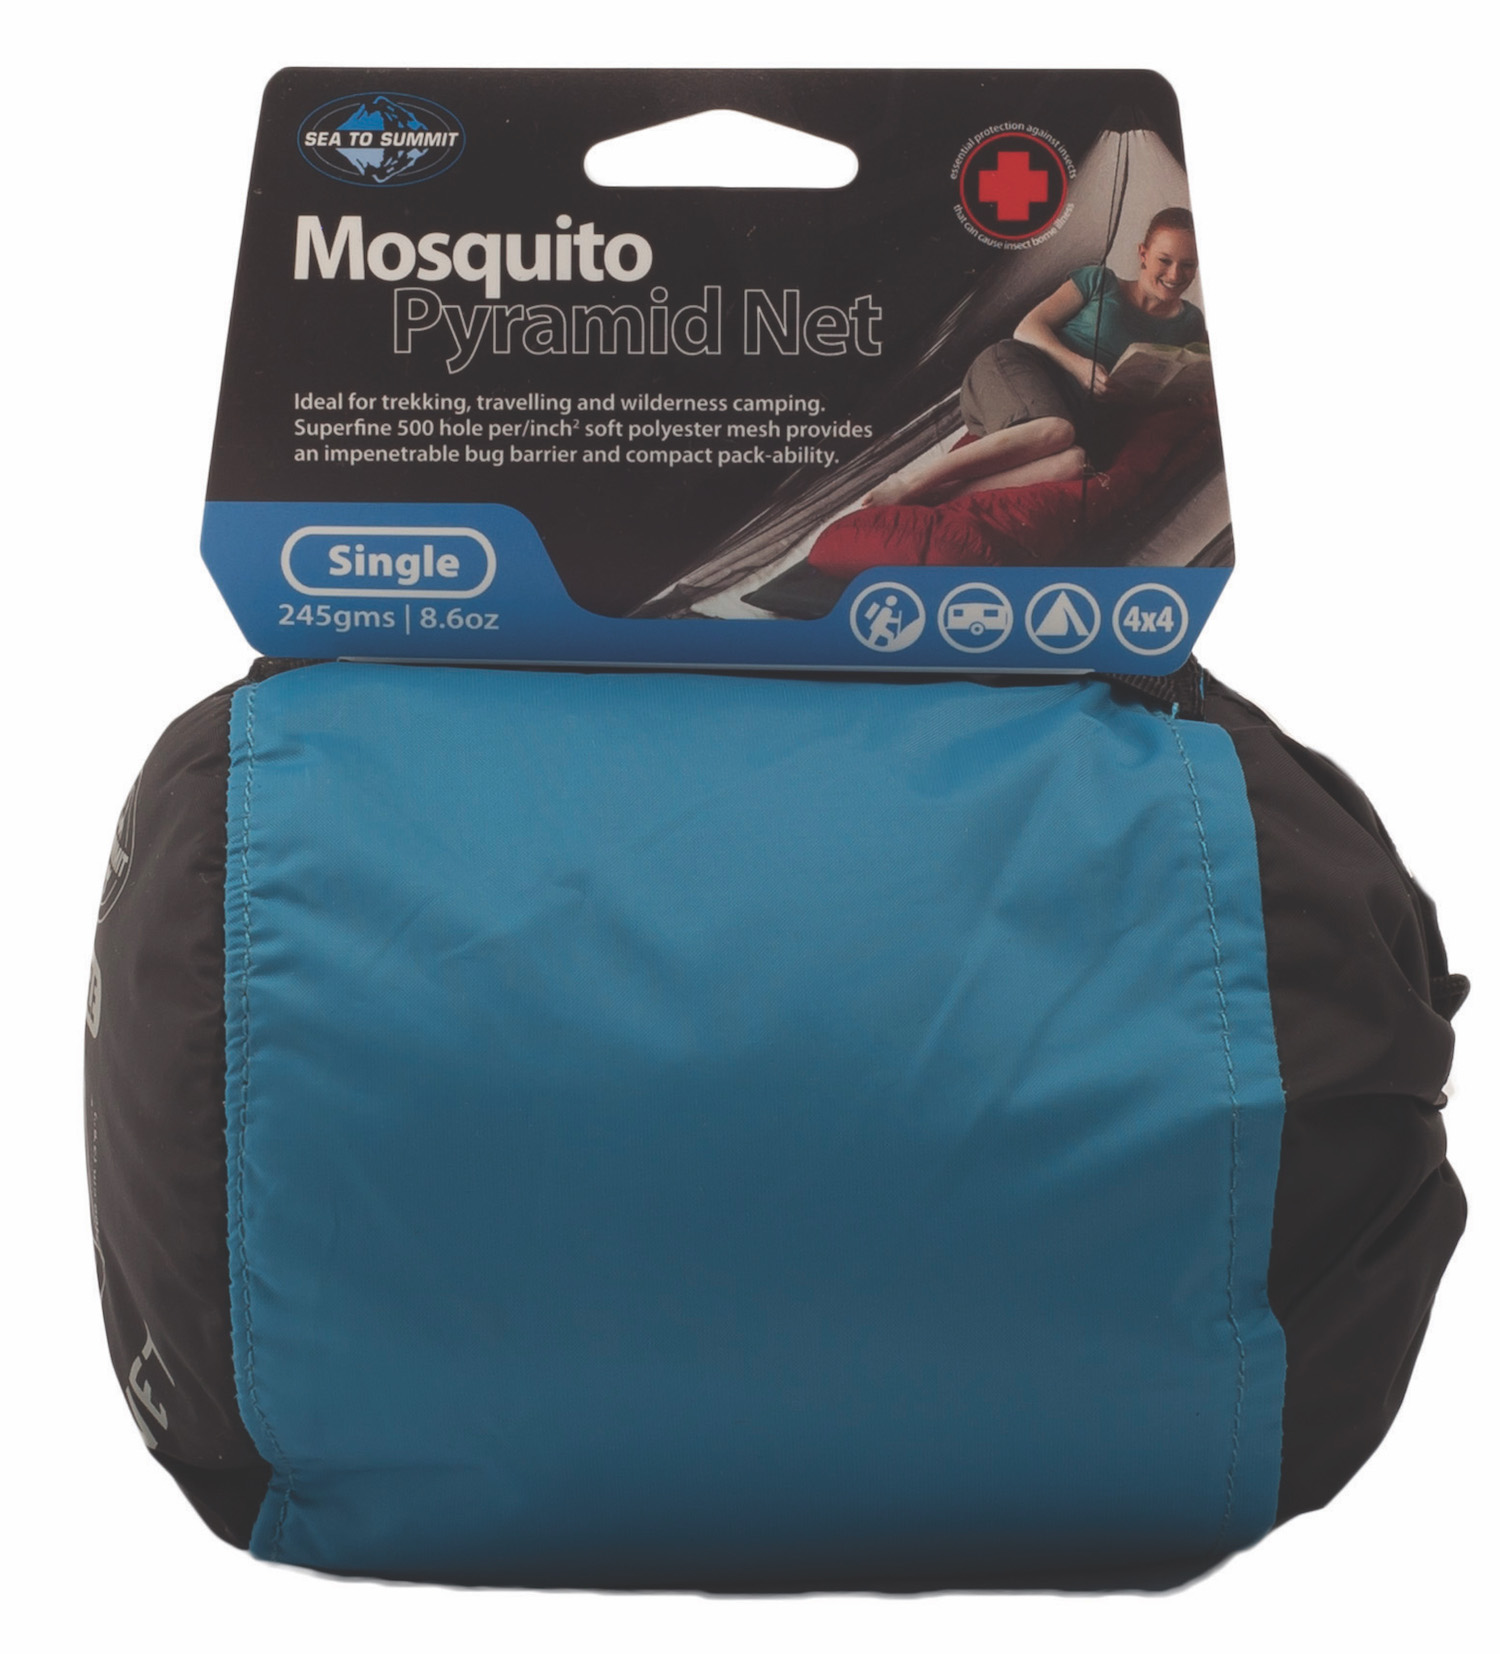 Sea To Summit Simple Mosquito Pyramid Net Single - Moustiquaire